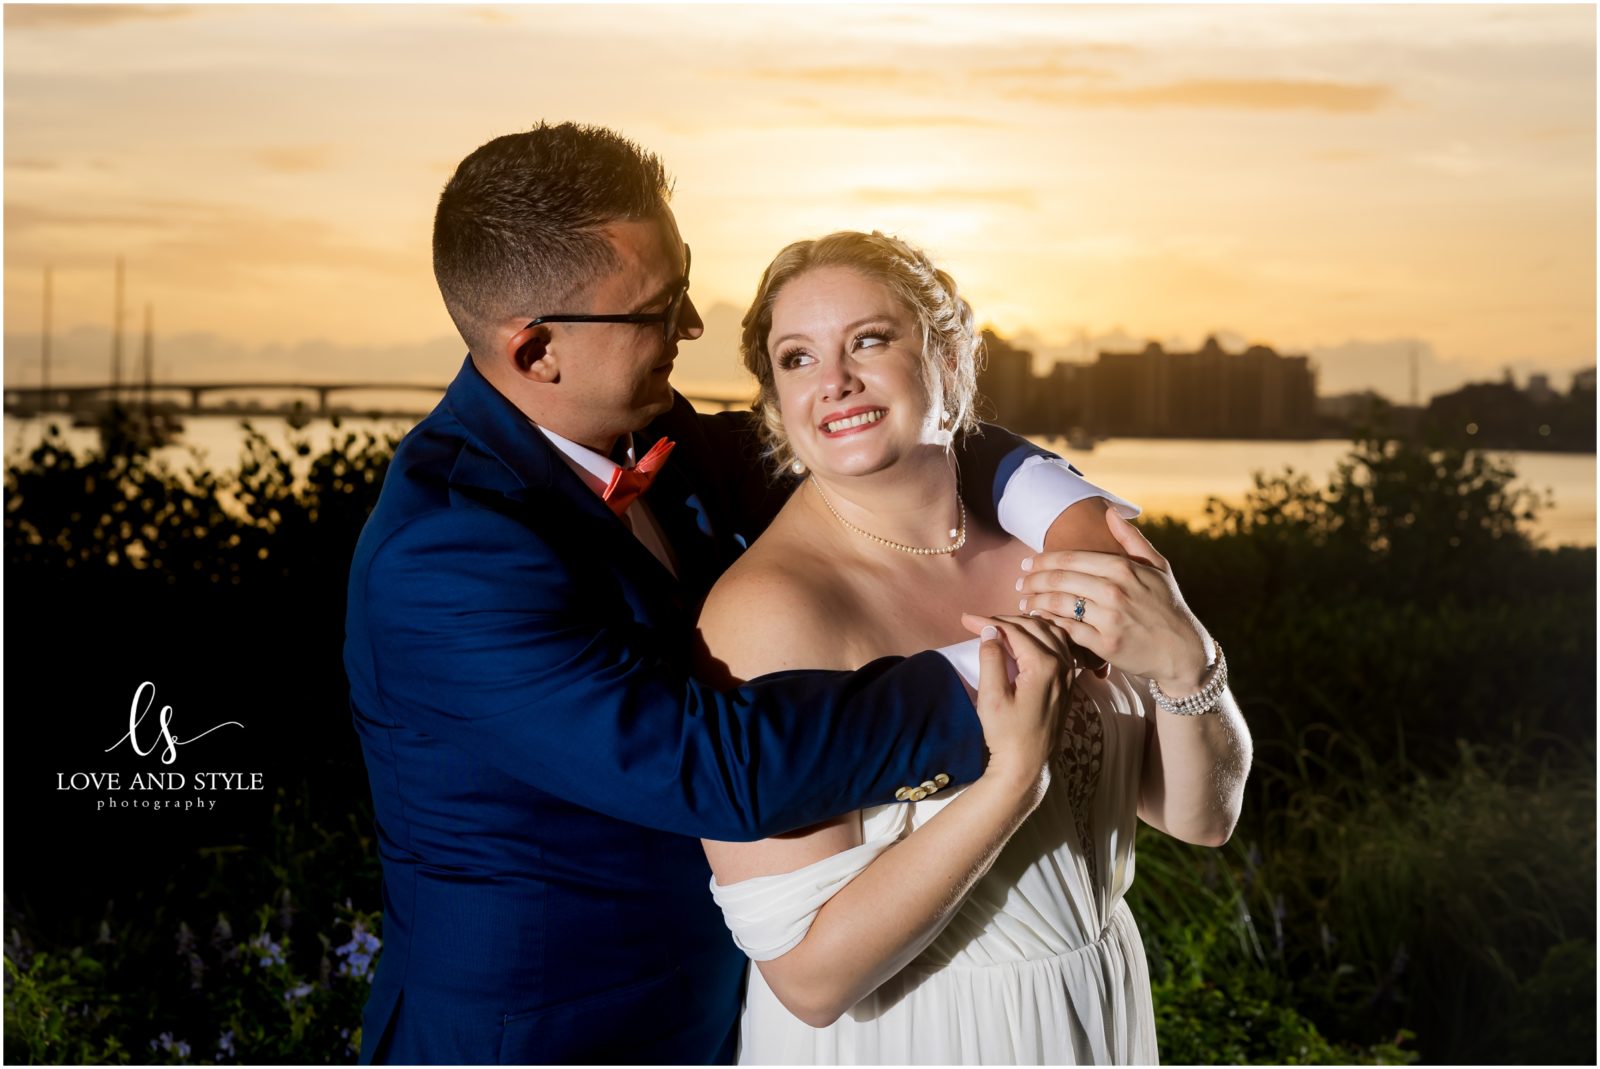 Bride and groom portrait at sunset at their Wedding at Selby Gardens Sarasota